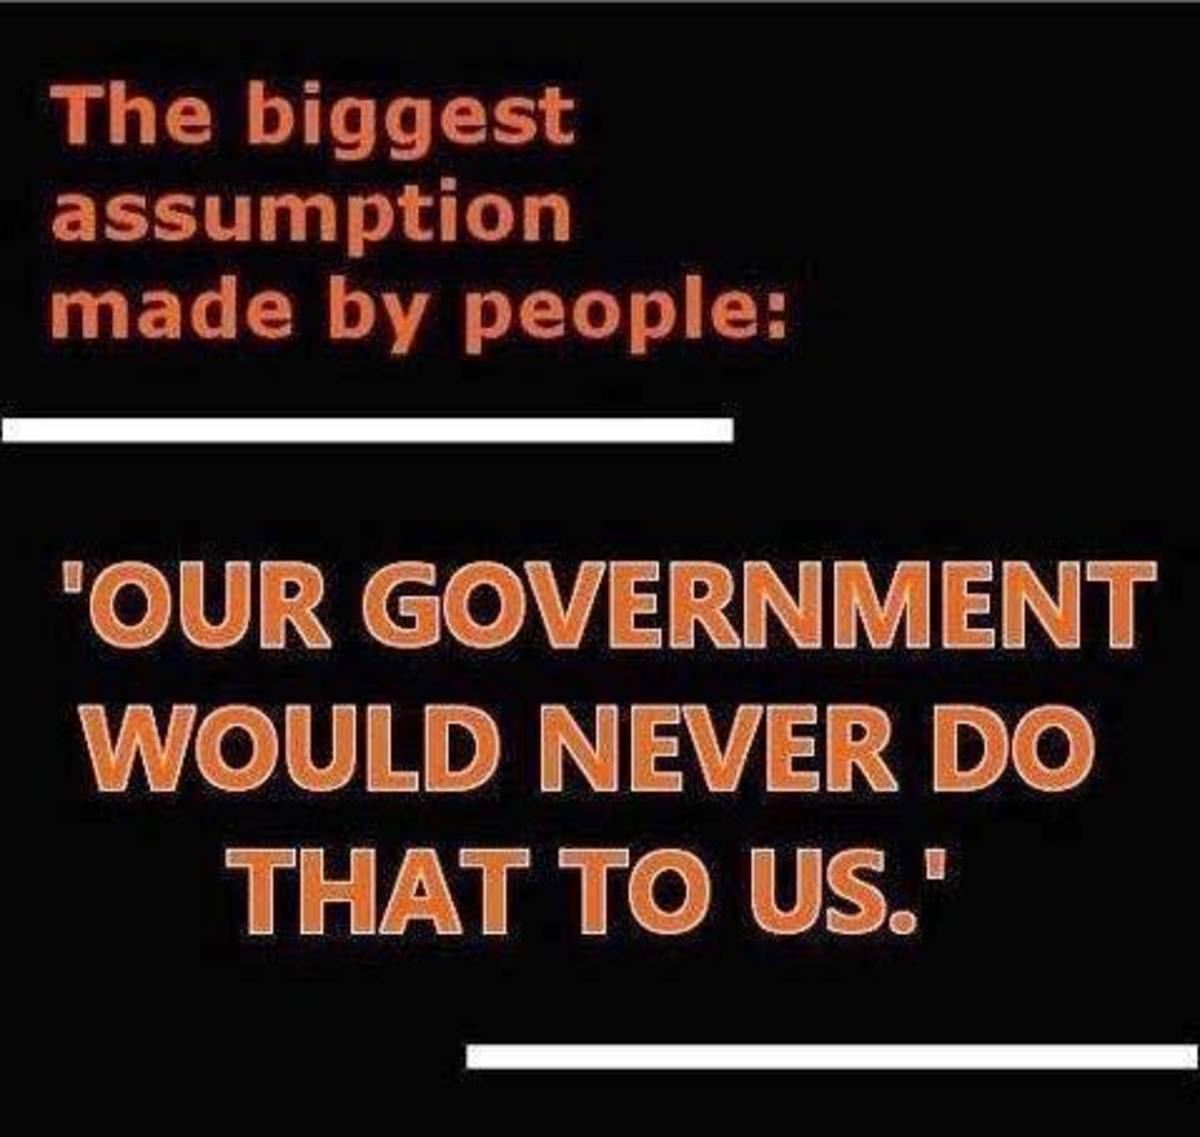 What Is The Largest Assumption Held By Public About Government?